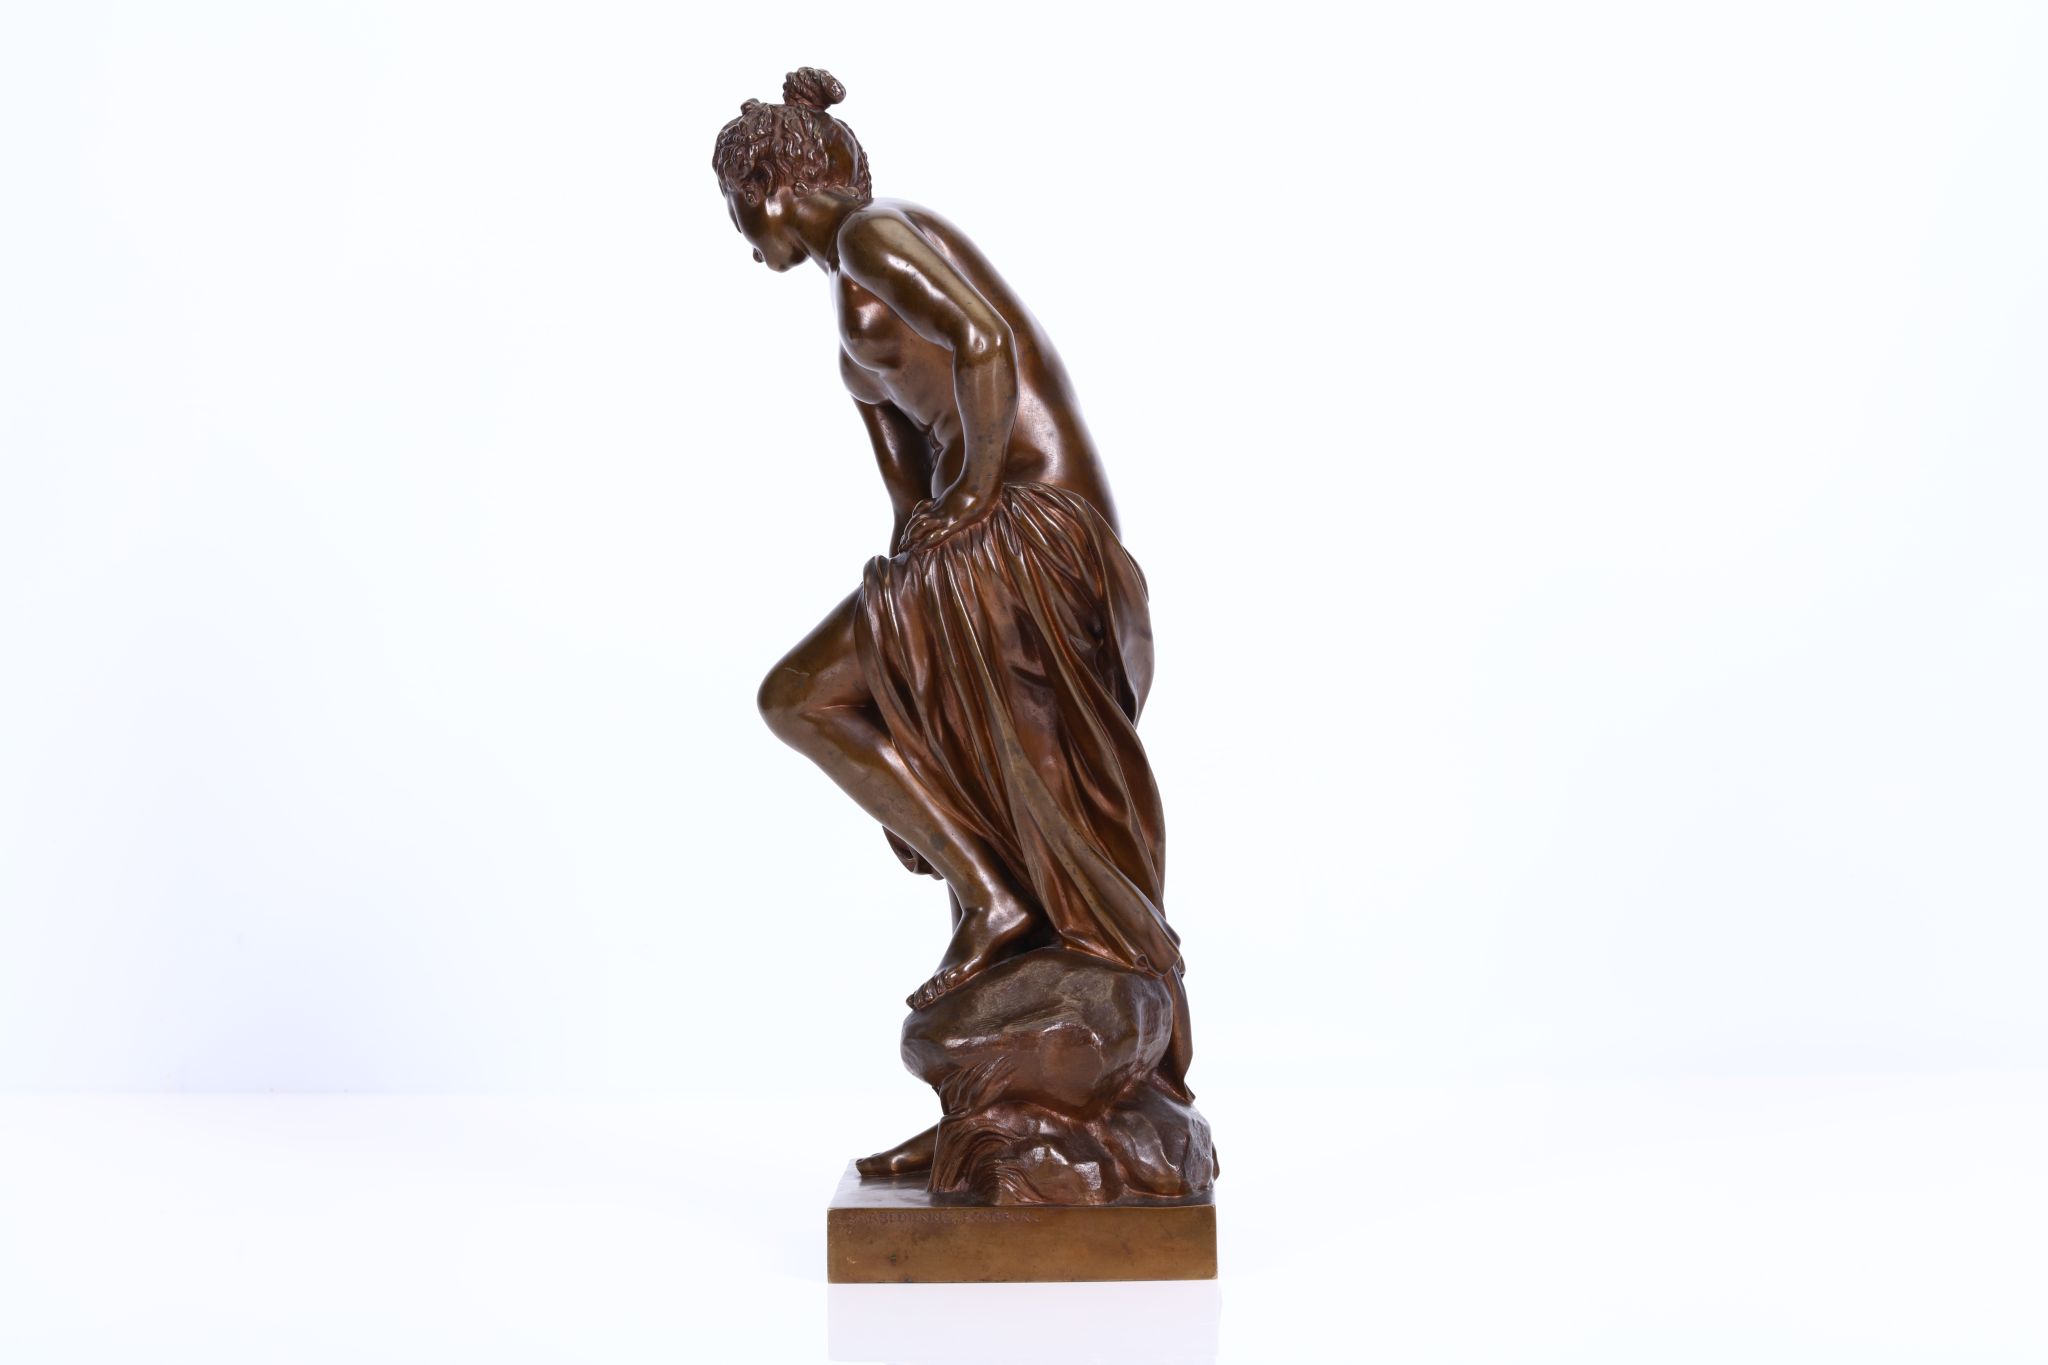 AFTER CHRISTOPHE GABRIEL ALLEGRAIN (FRENCH, 1710-1795): A LATE 19TH CENTURY FRENCH BRONZE FIGURE - Image 2 of 8